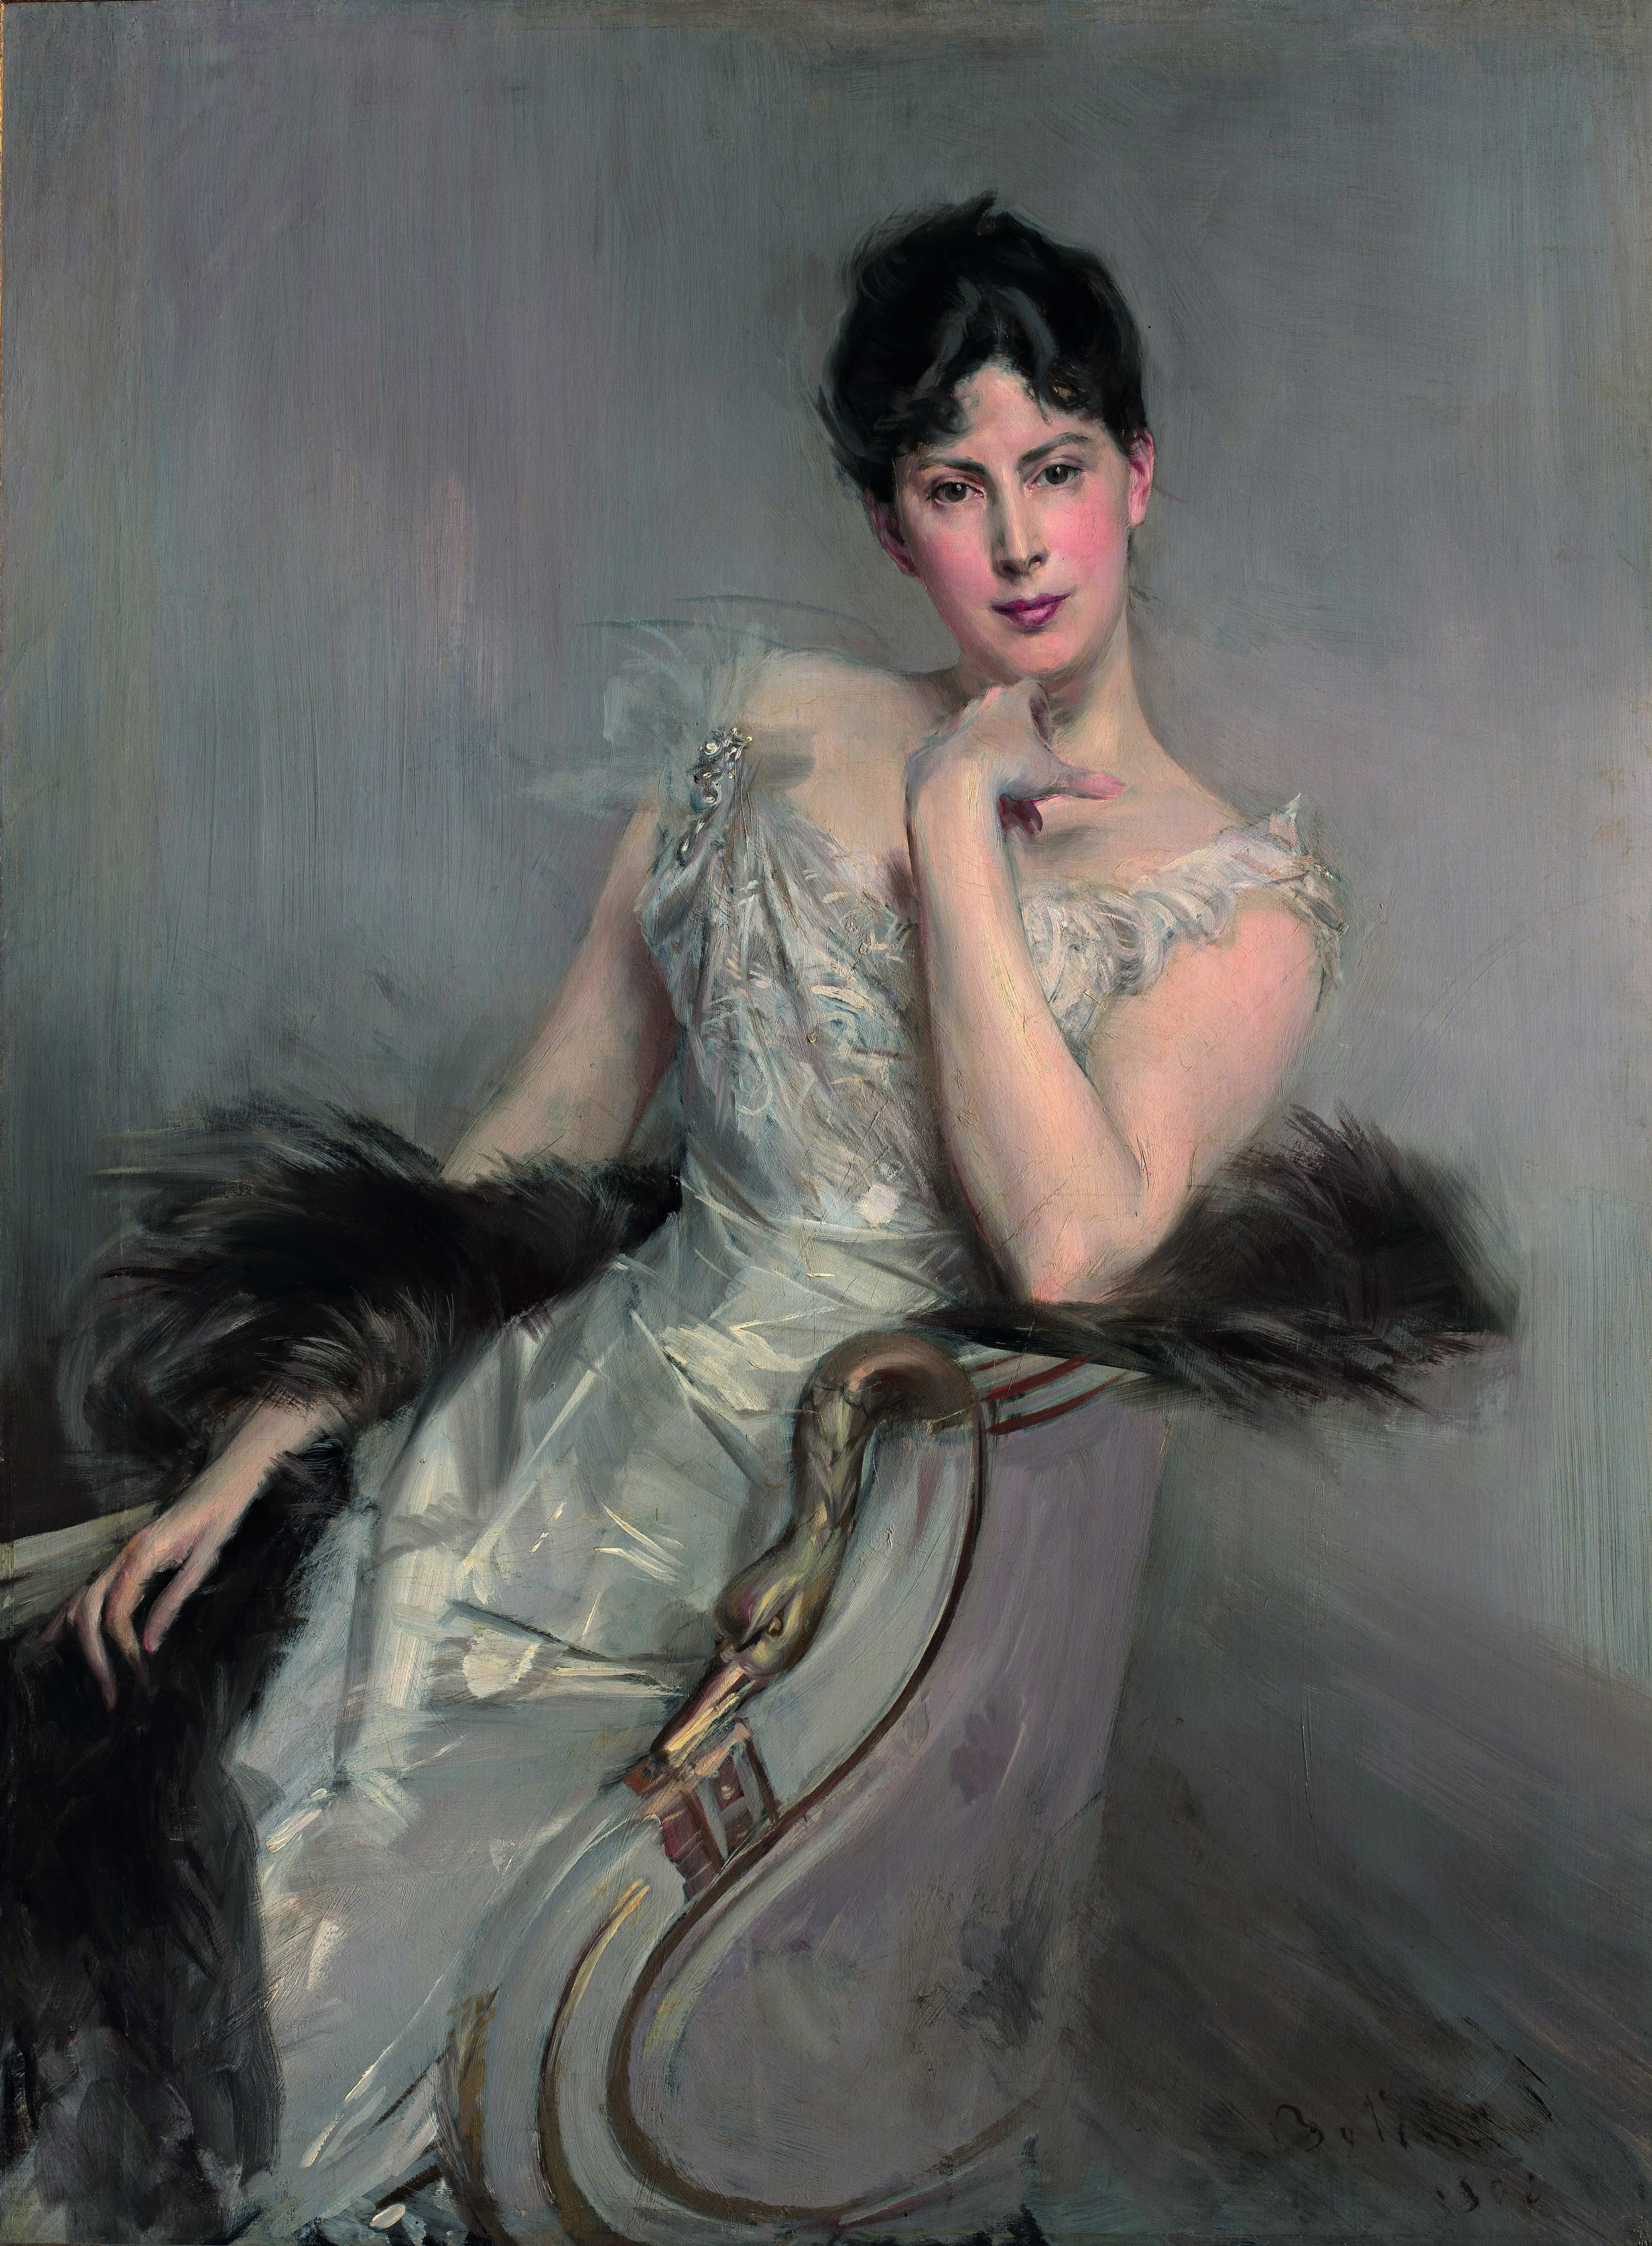 Boldini, Giovanni (1842-1931): Lady in White, 1902 Florence Gallery of Modern Art *** Permission for usage must be provided in writing from Scala.